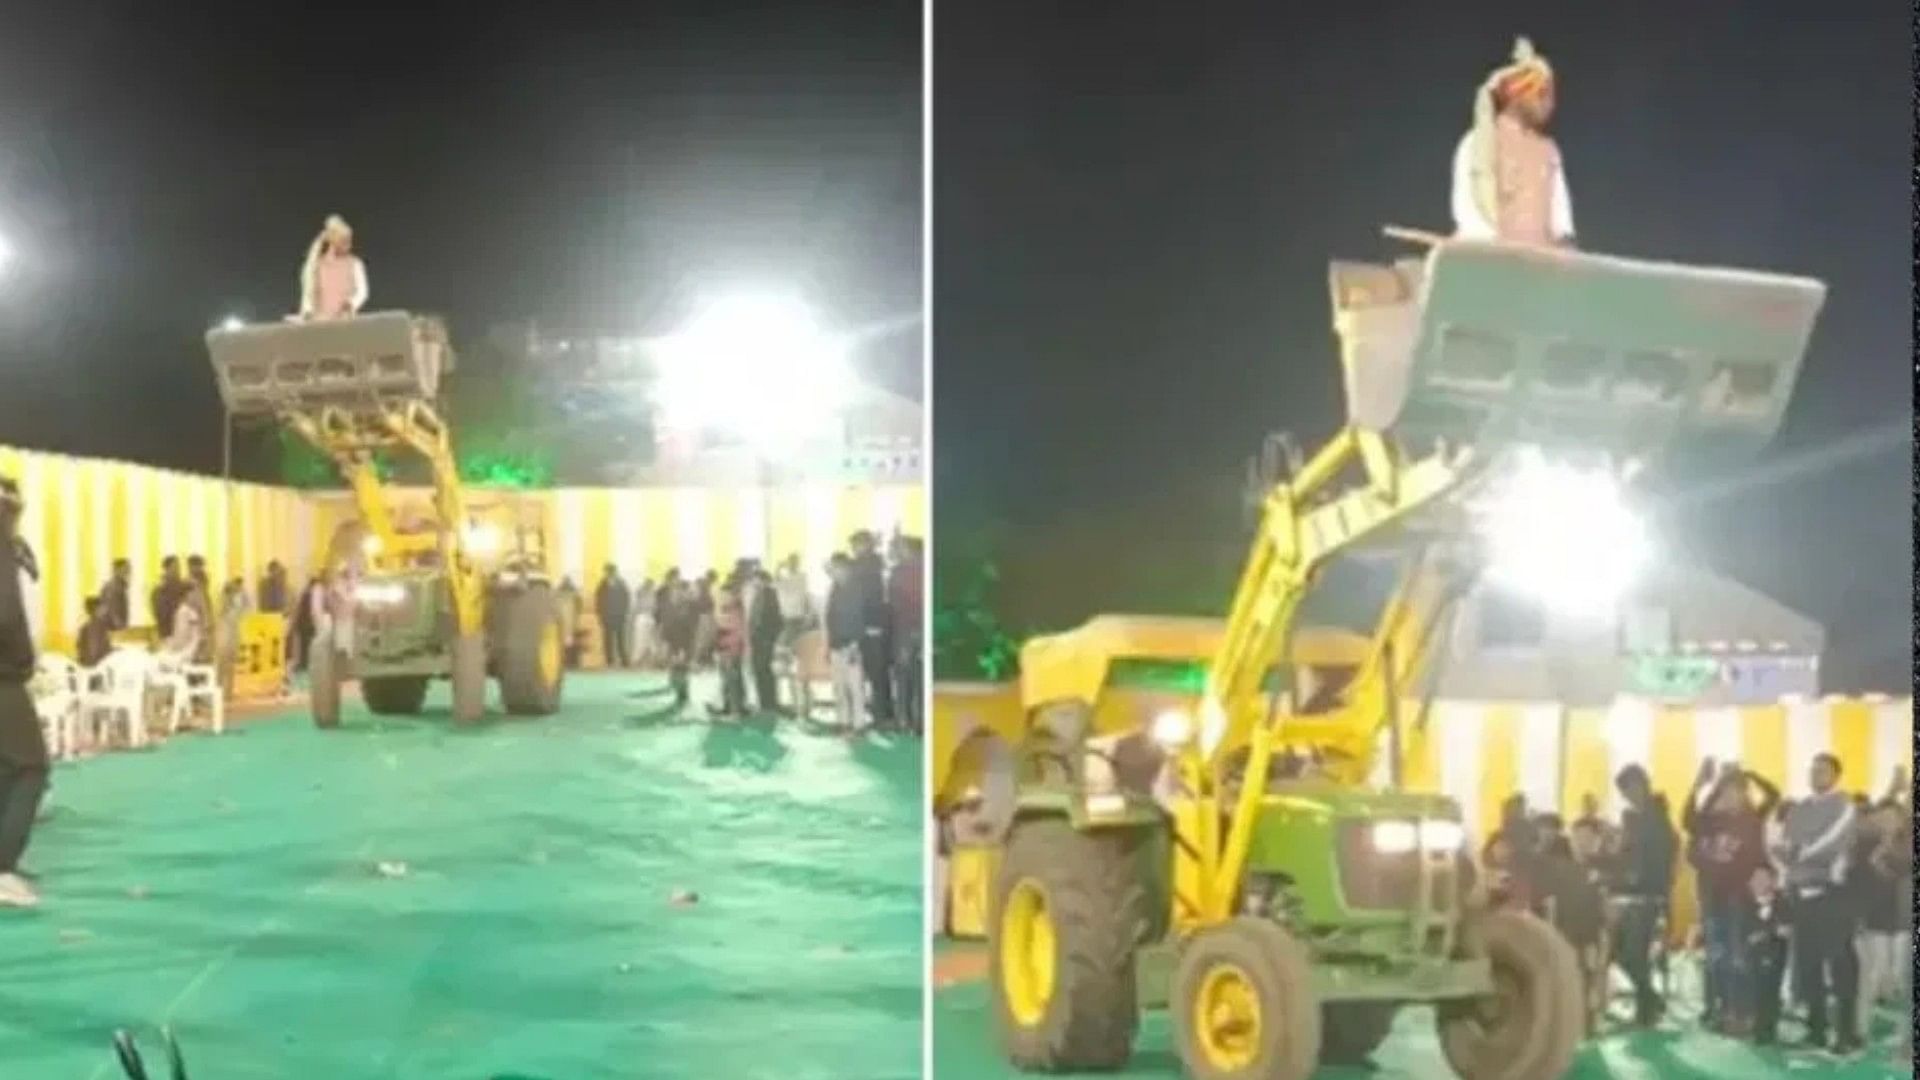 Groom entry viral video groom takes entry on jcb hilarious video on internet